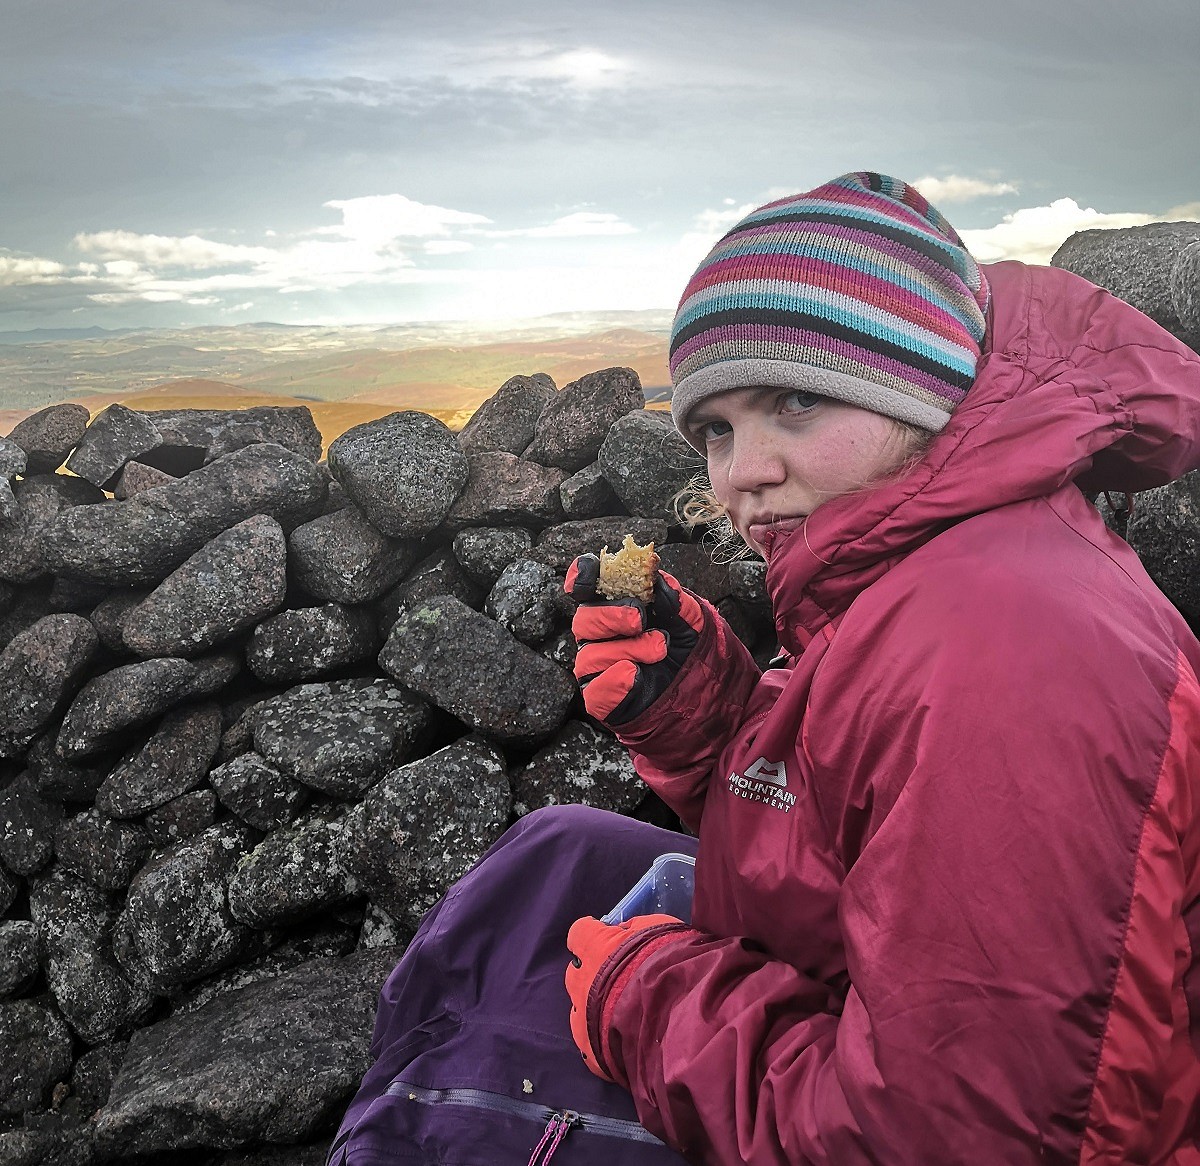 I’m really thrilled to be eating apple cake in -3 degrees on Mount Keen, and still look like a toddler at the age of 23  © Fliss Freeborn